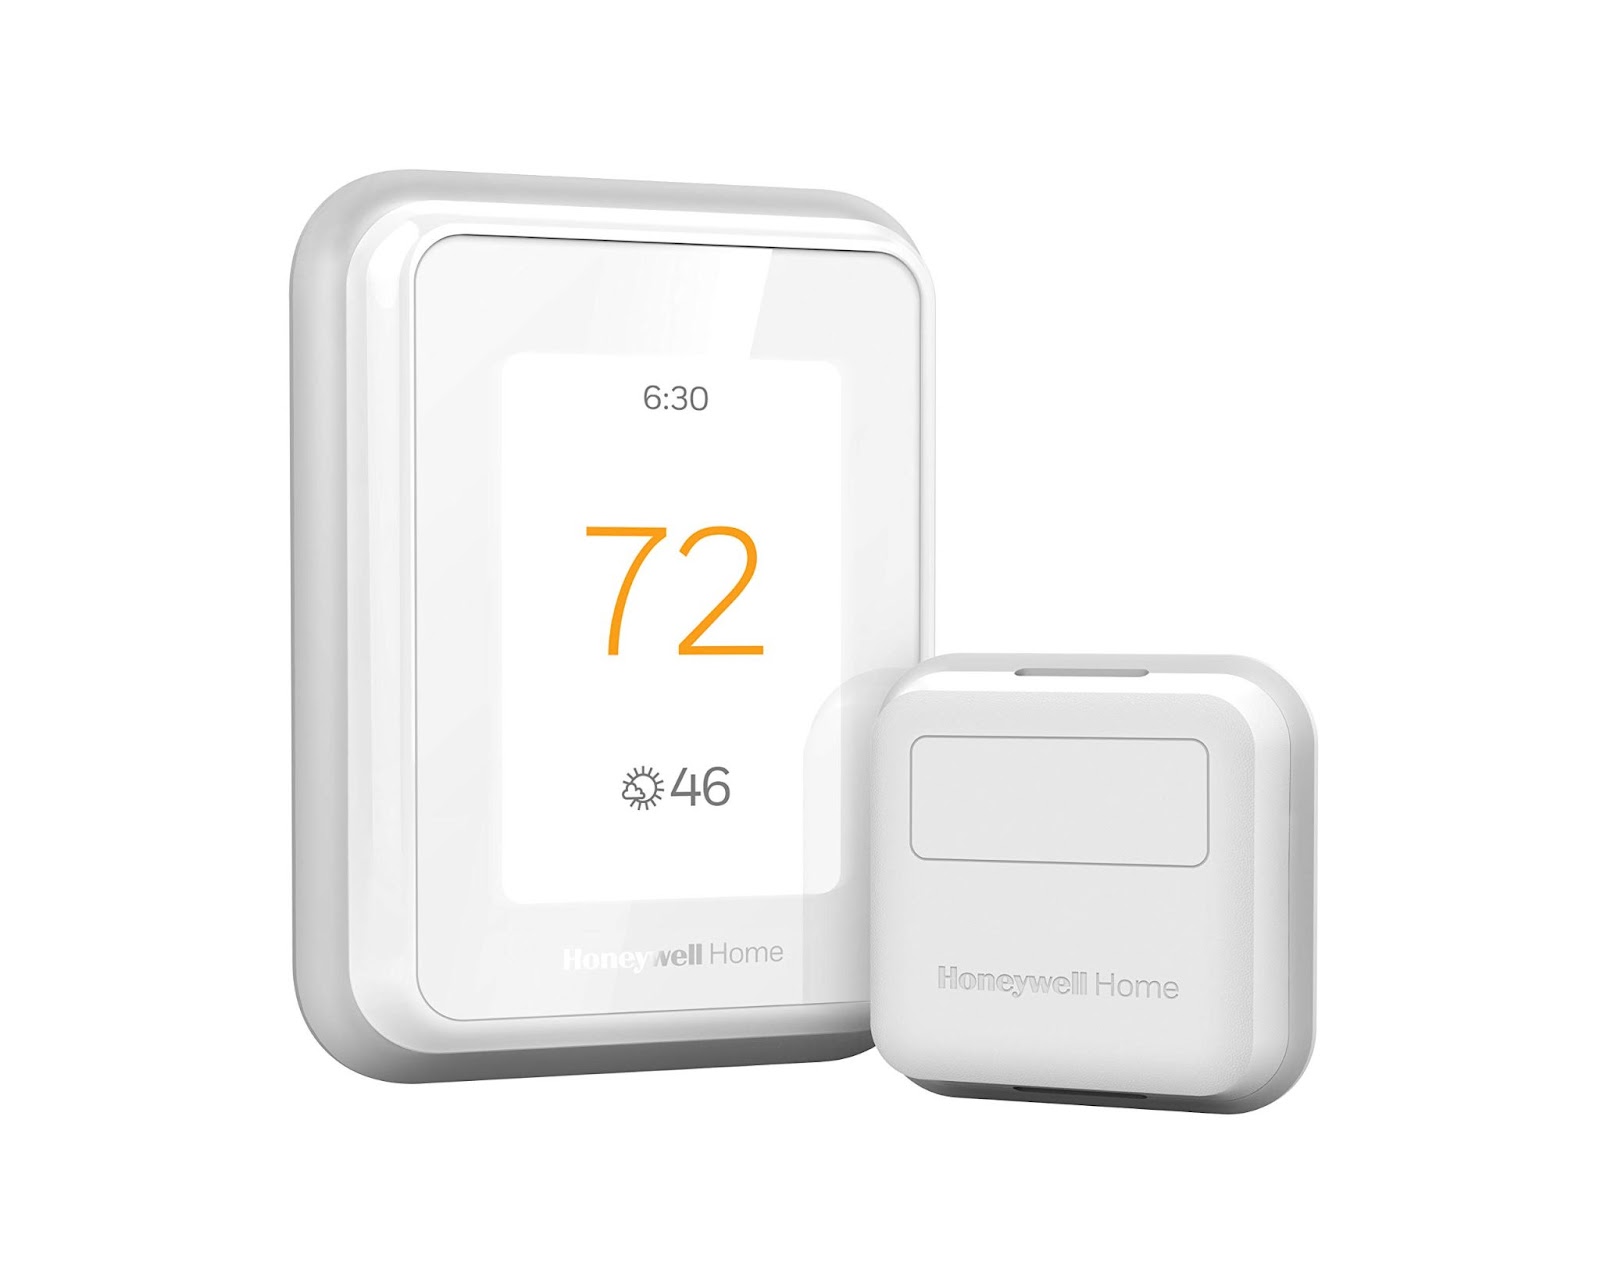 Honeywell Home T9 Smart Thermostat is a white vertical rounded rectangular shaped thermostat that comes with a rounded square sensor to assist it. 